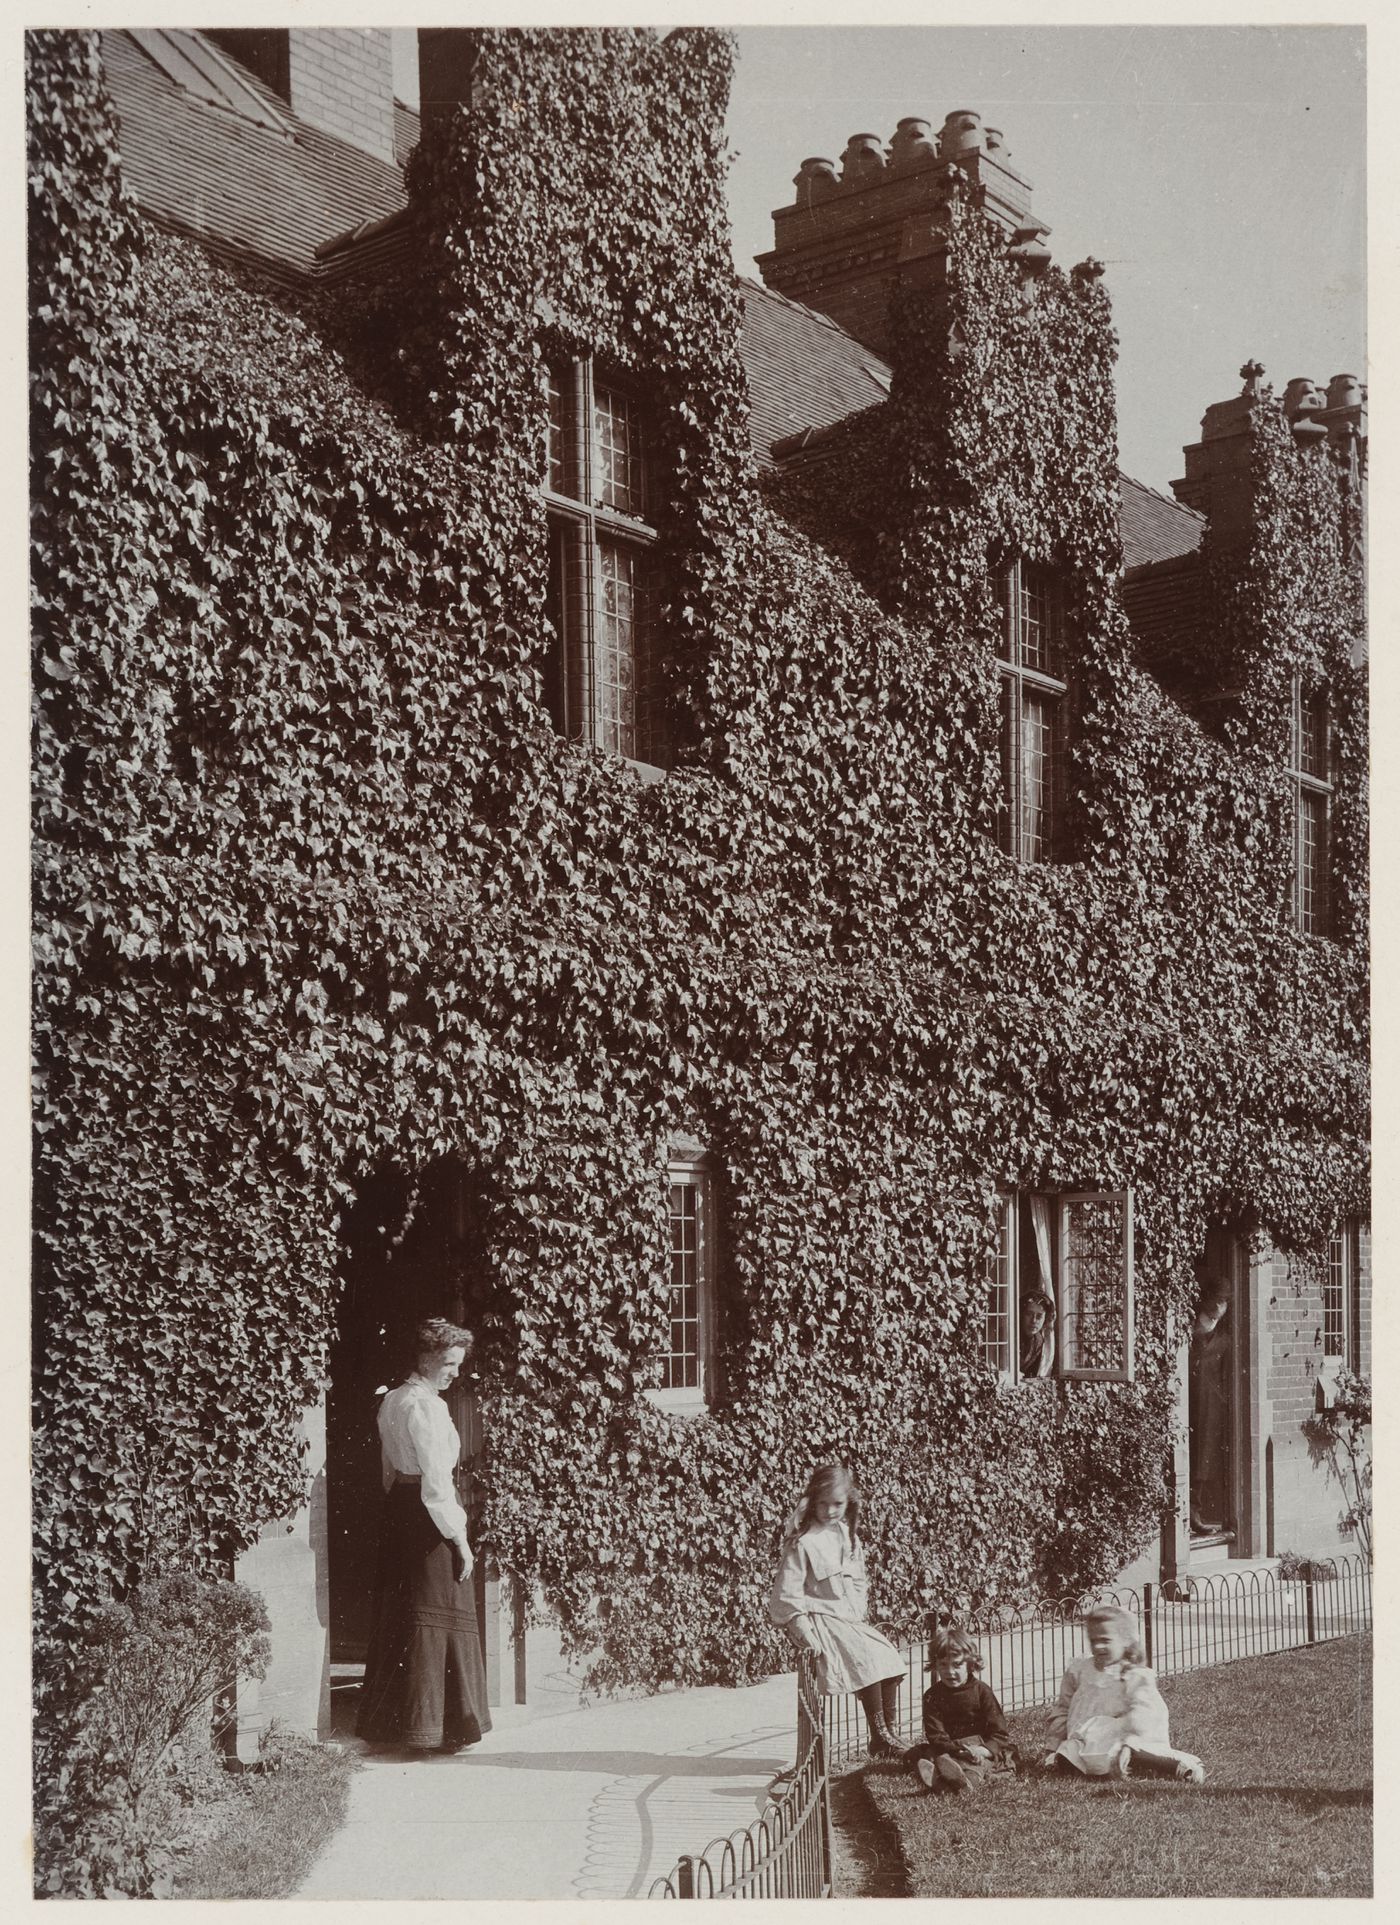 View of woman and children outside Cross Street cottages, Port Sunlight, England, United Kindgom